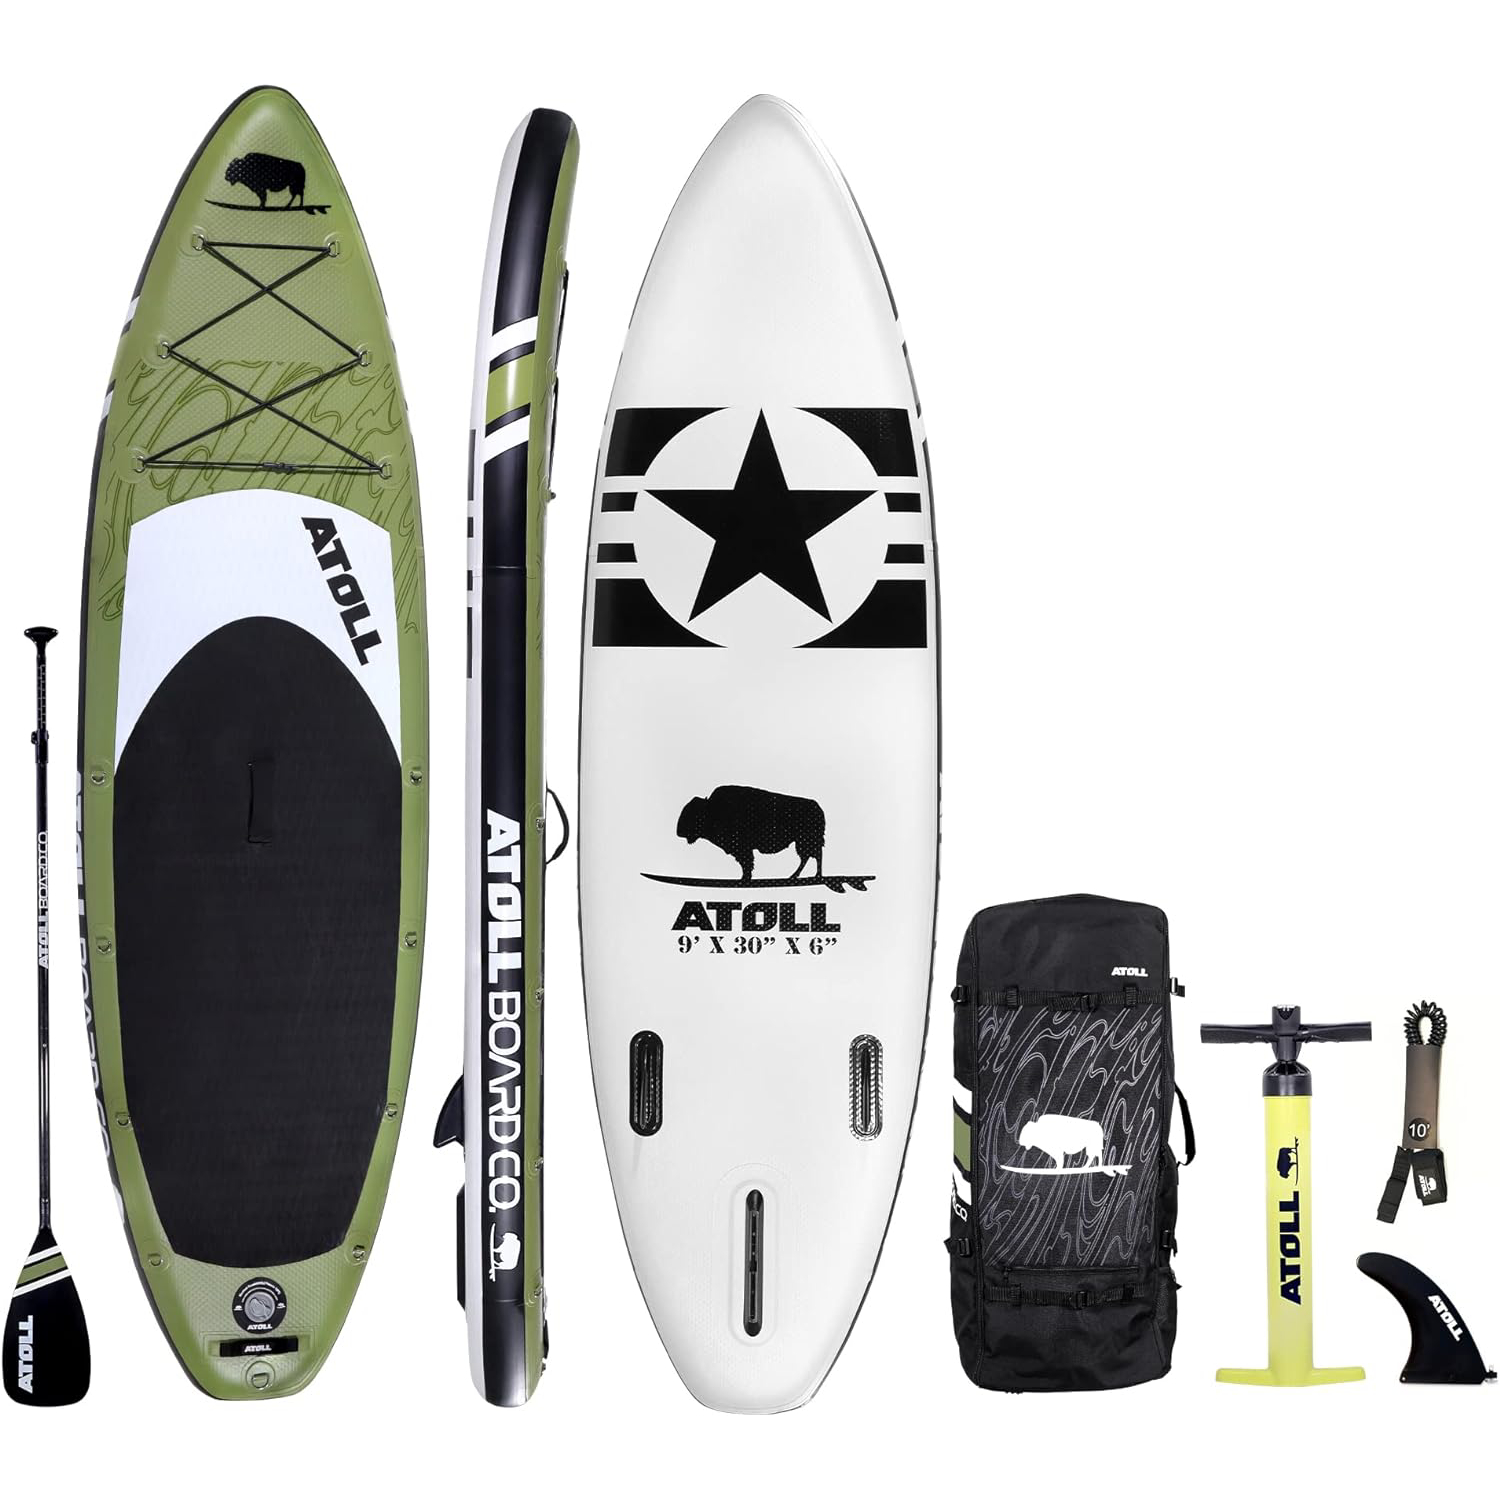 Atoll Inflatable Stand Up Paddle Board ISUP, Bravo Hand Pump and 3 Piece Paddle 